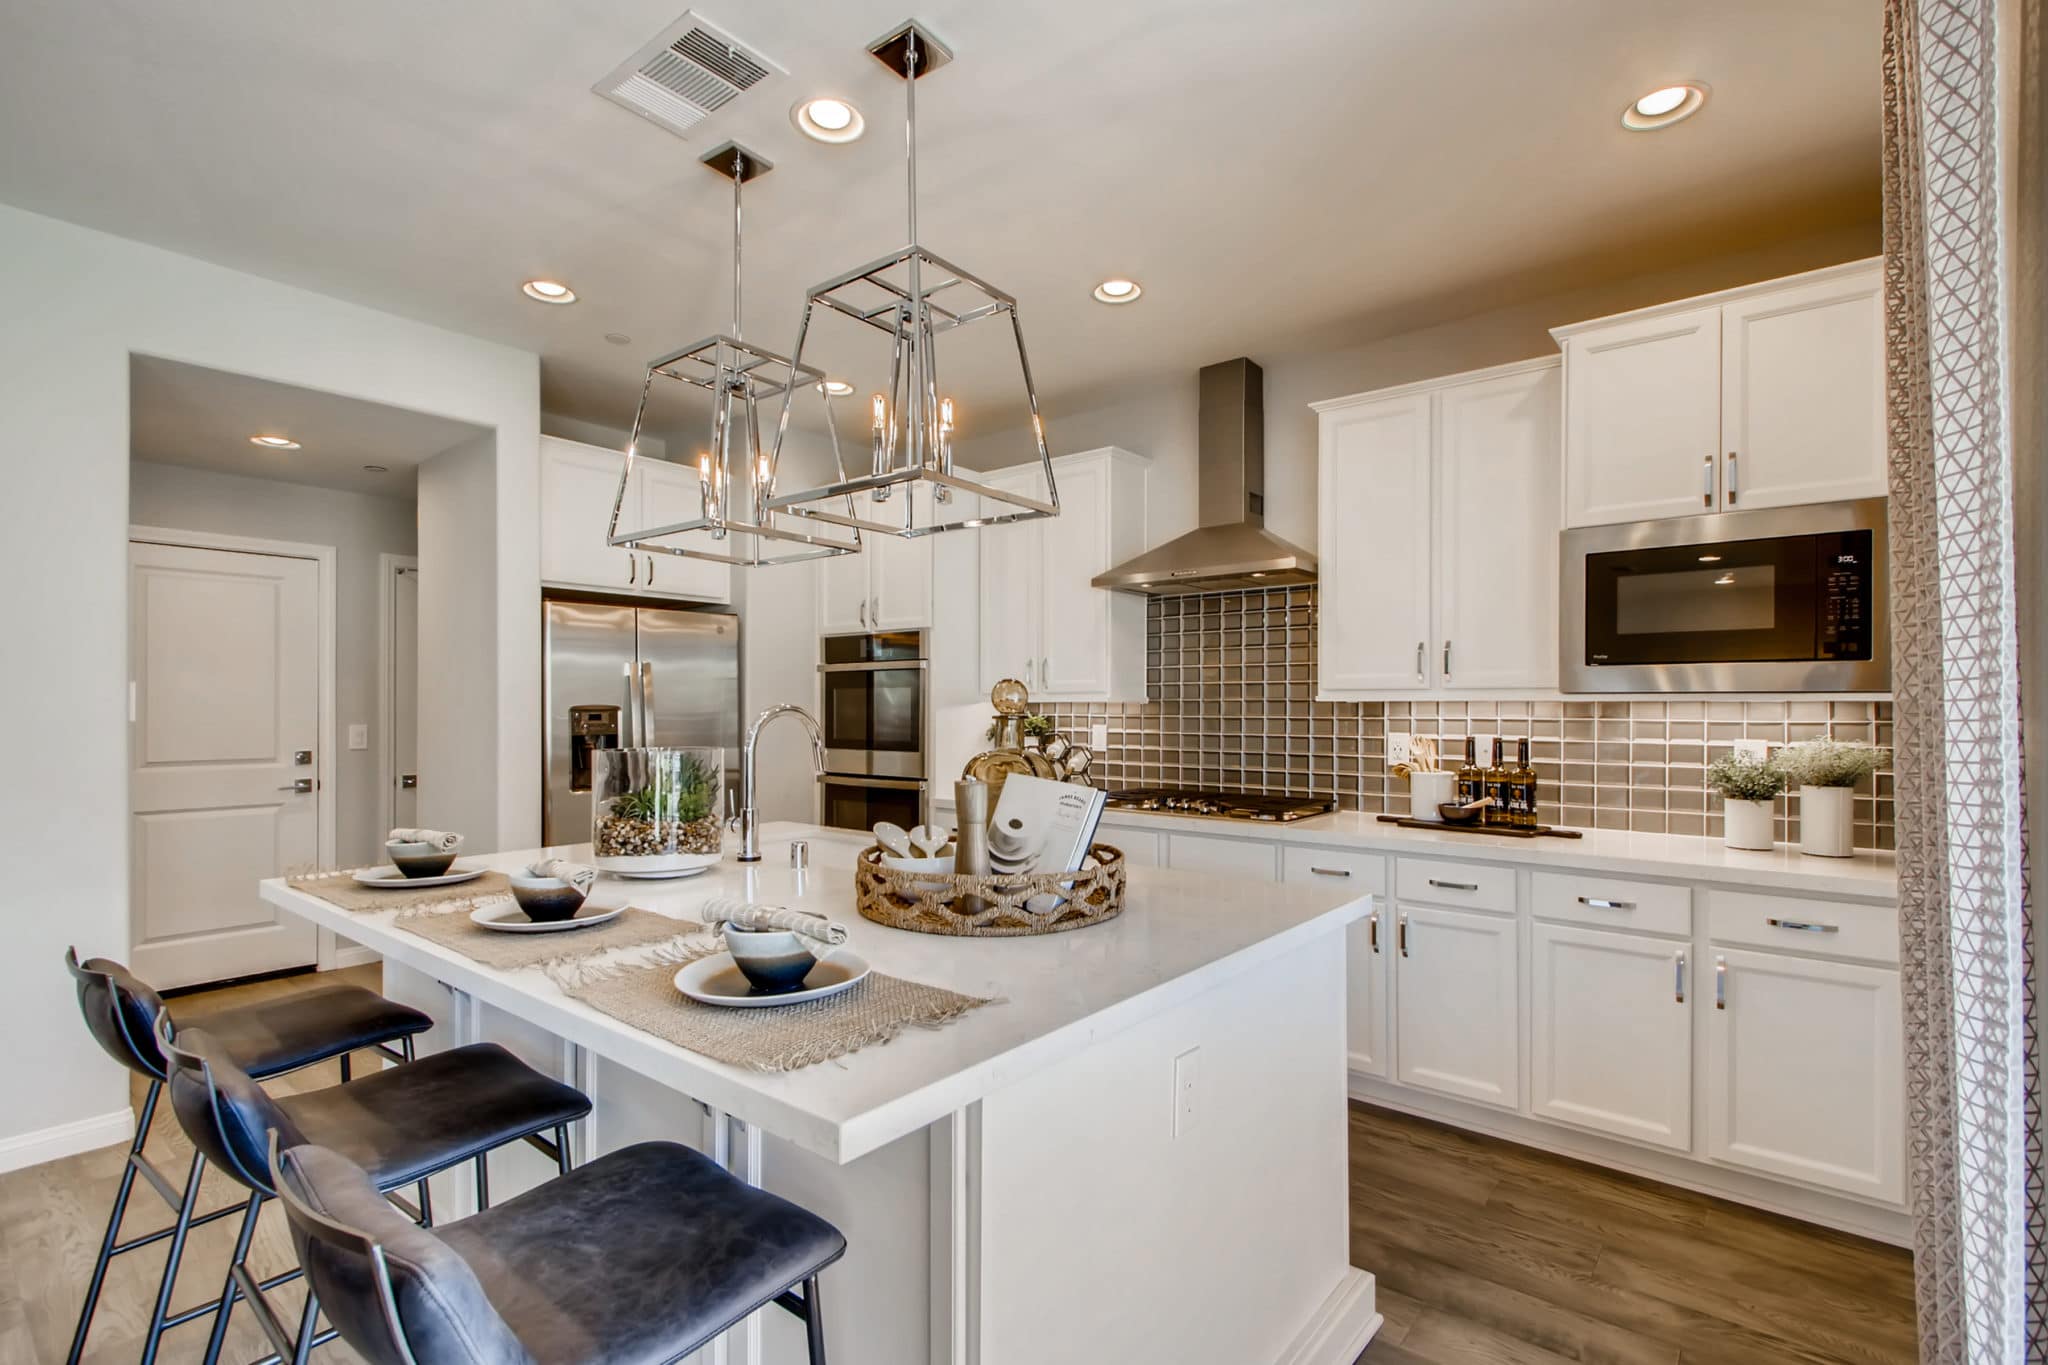 Kitchen of Mojave Plan at Crystal Canyon by Woodside Homes